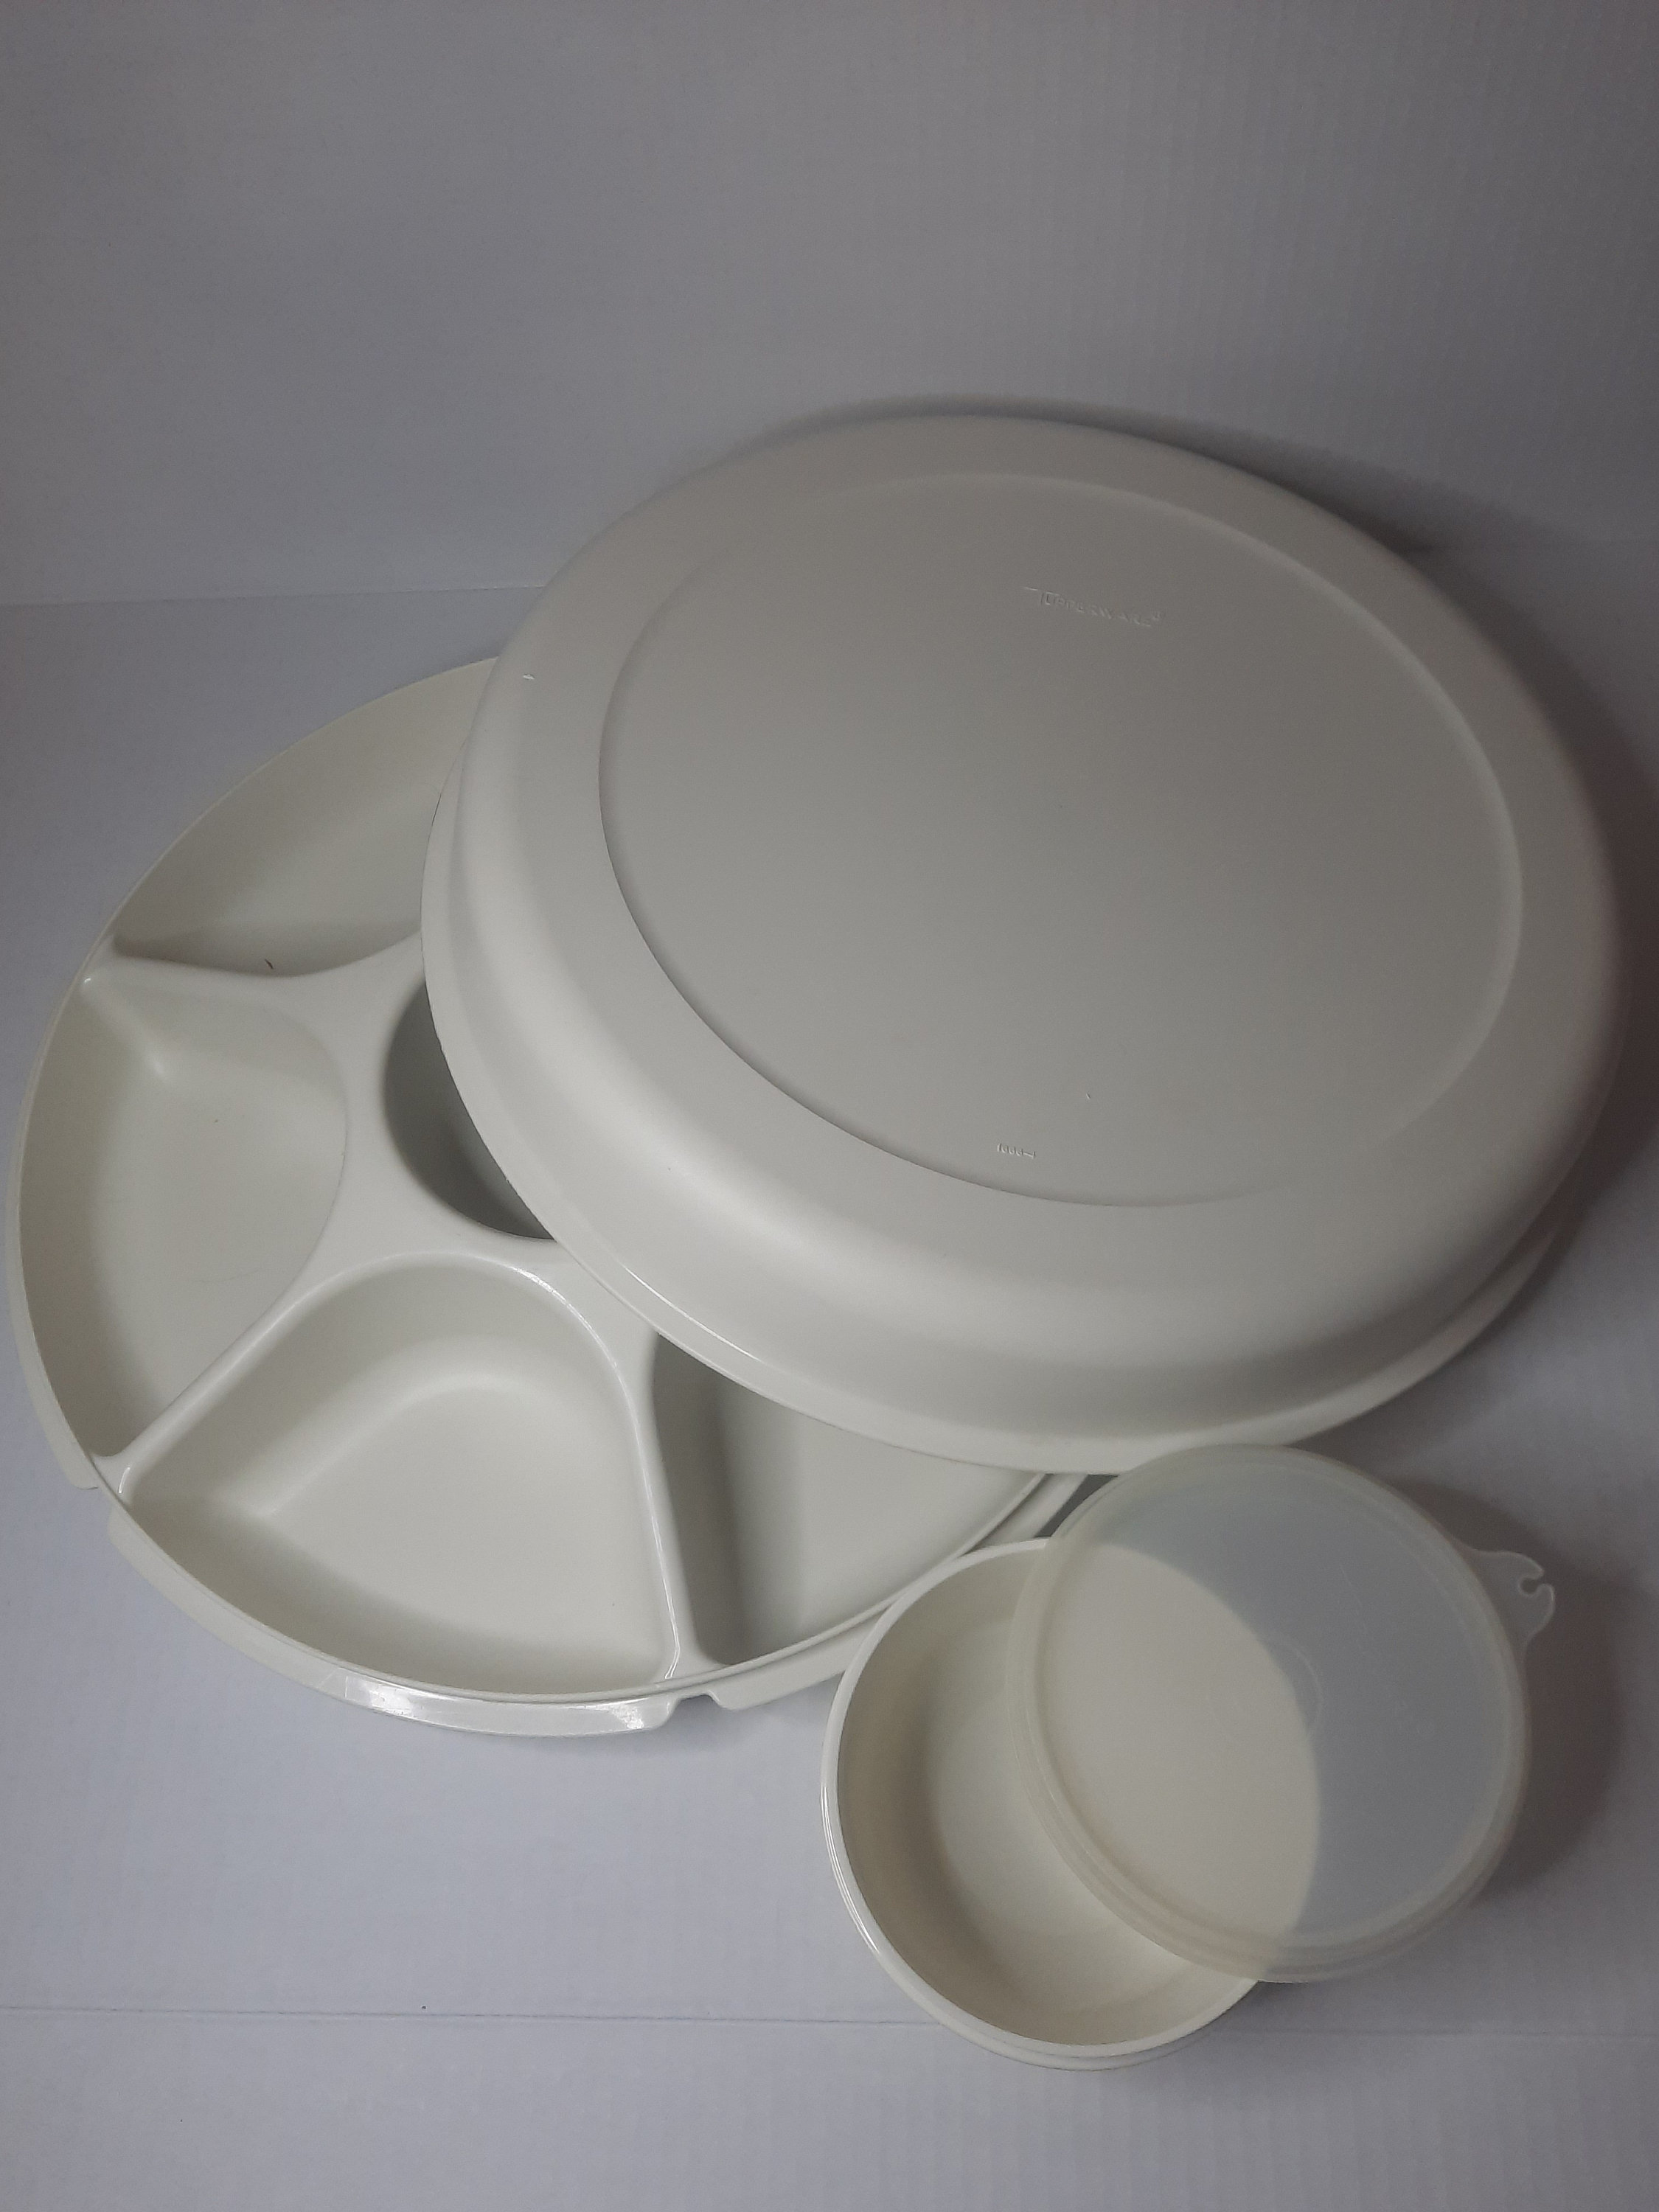 Tupperware Divided Veggie Tray & Dip Keeper - household items - by